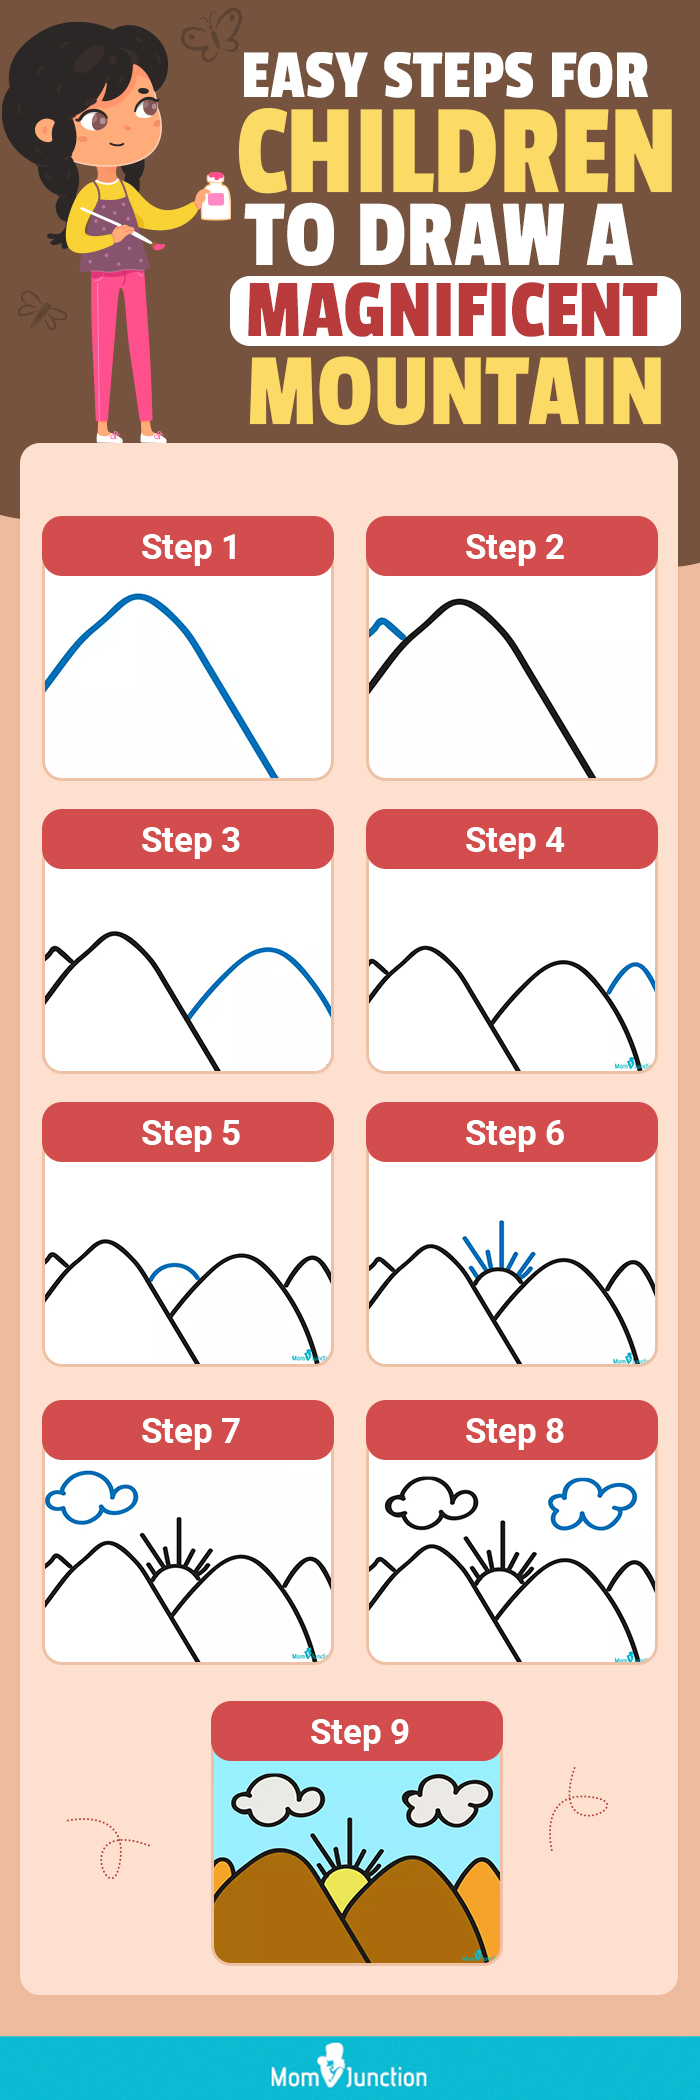 easy steps for children to draw a magnificent mountain (infographic)